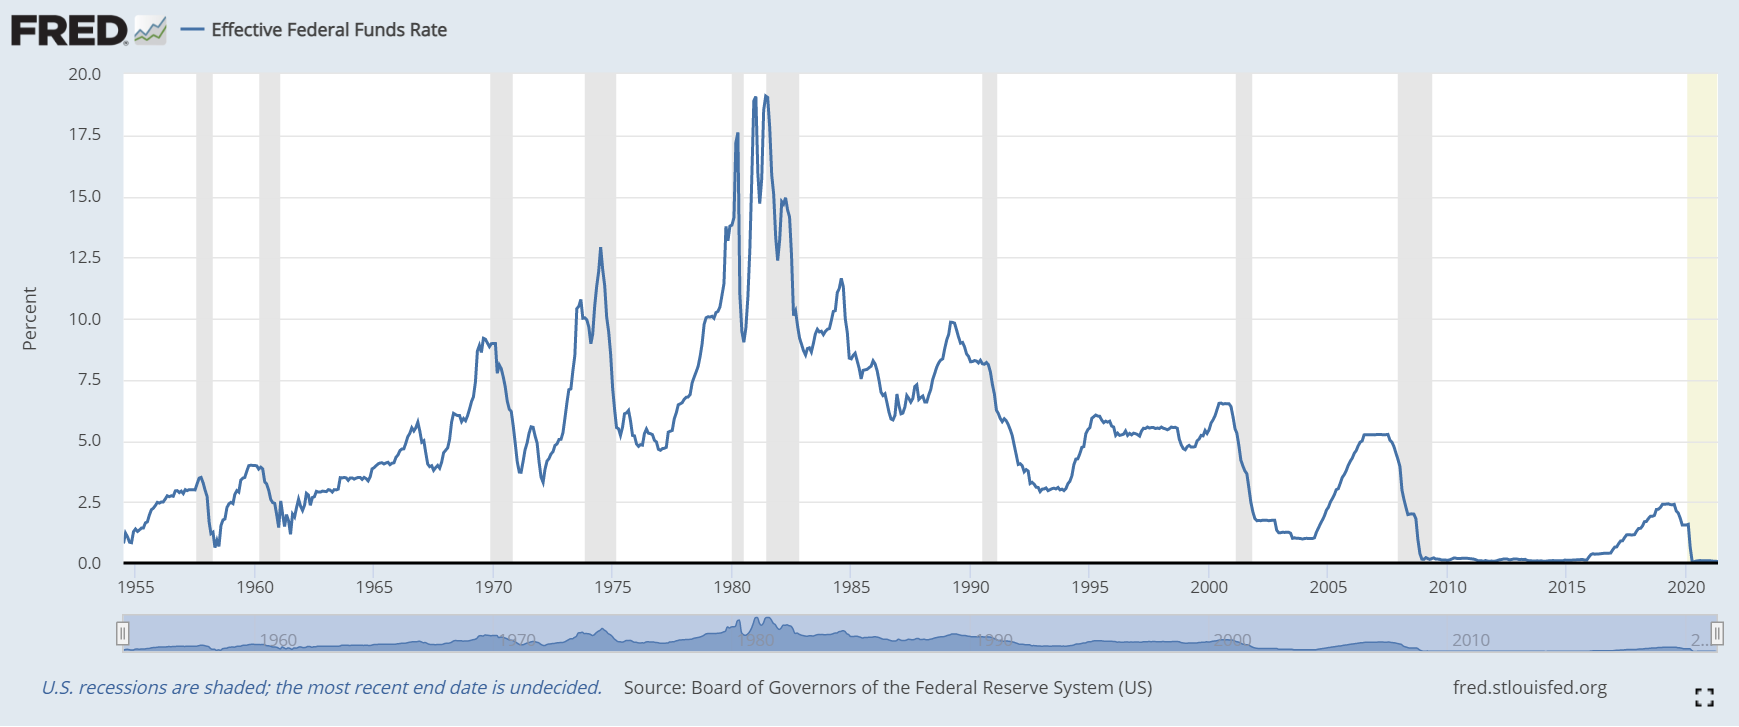 This chart shows the effective Federal Funds Rate (US interest rate) between 1955 and today: the flattening of rates on the right- hand-side reflects the attempt by central banks to generate a large monetary stimulus after 2008. Source: Board of Governors of the Federal Reserve, fred.stlouisfed.org